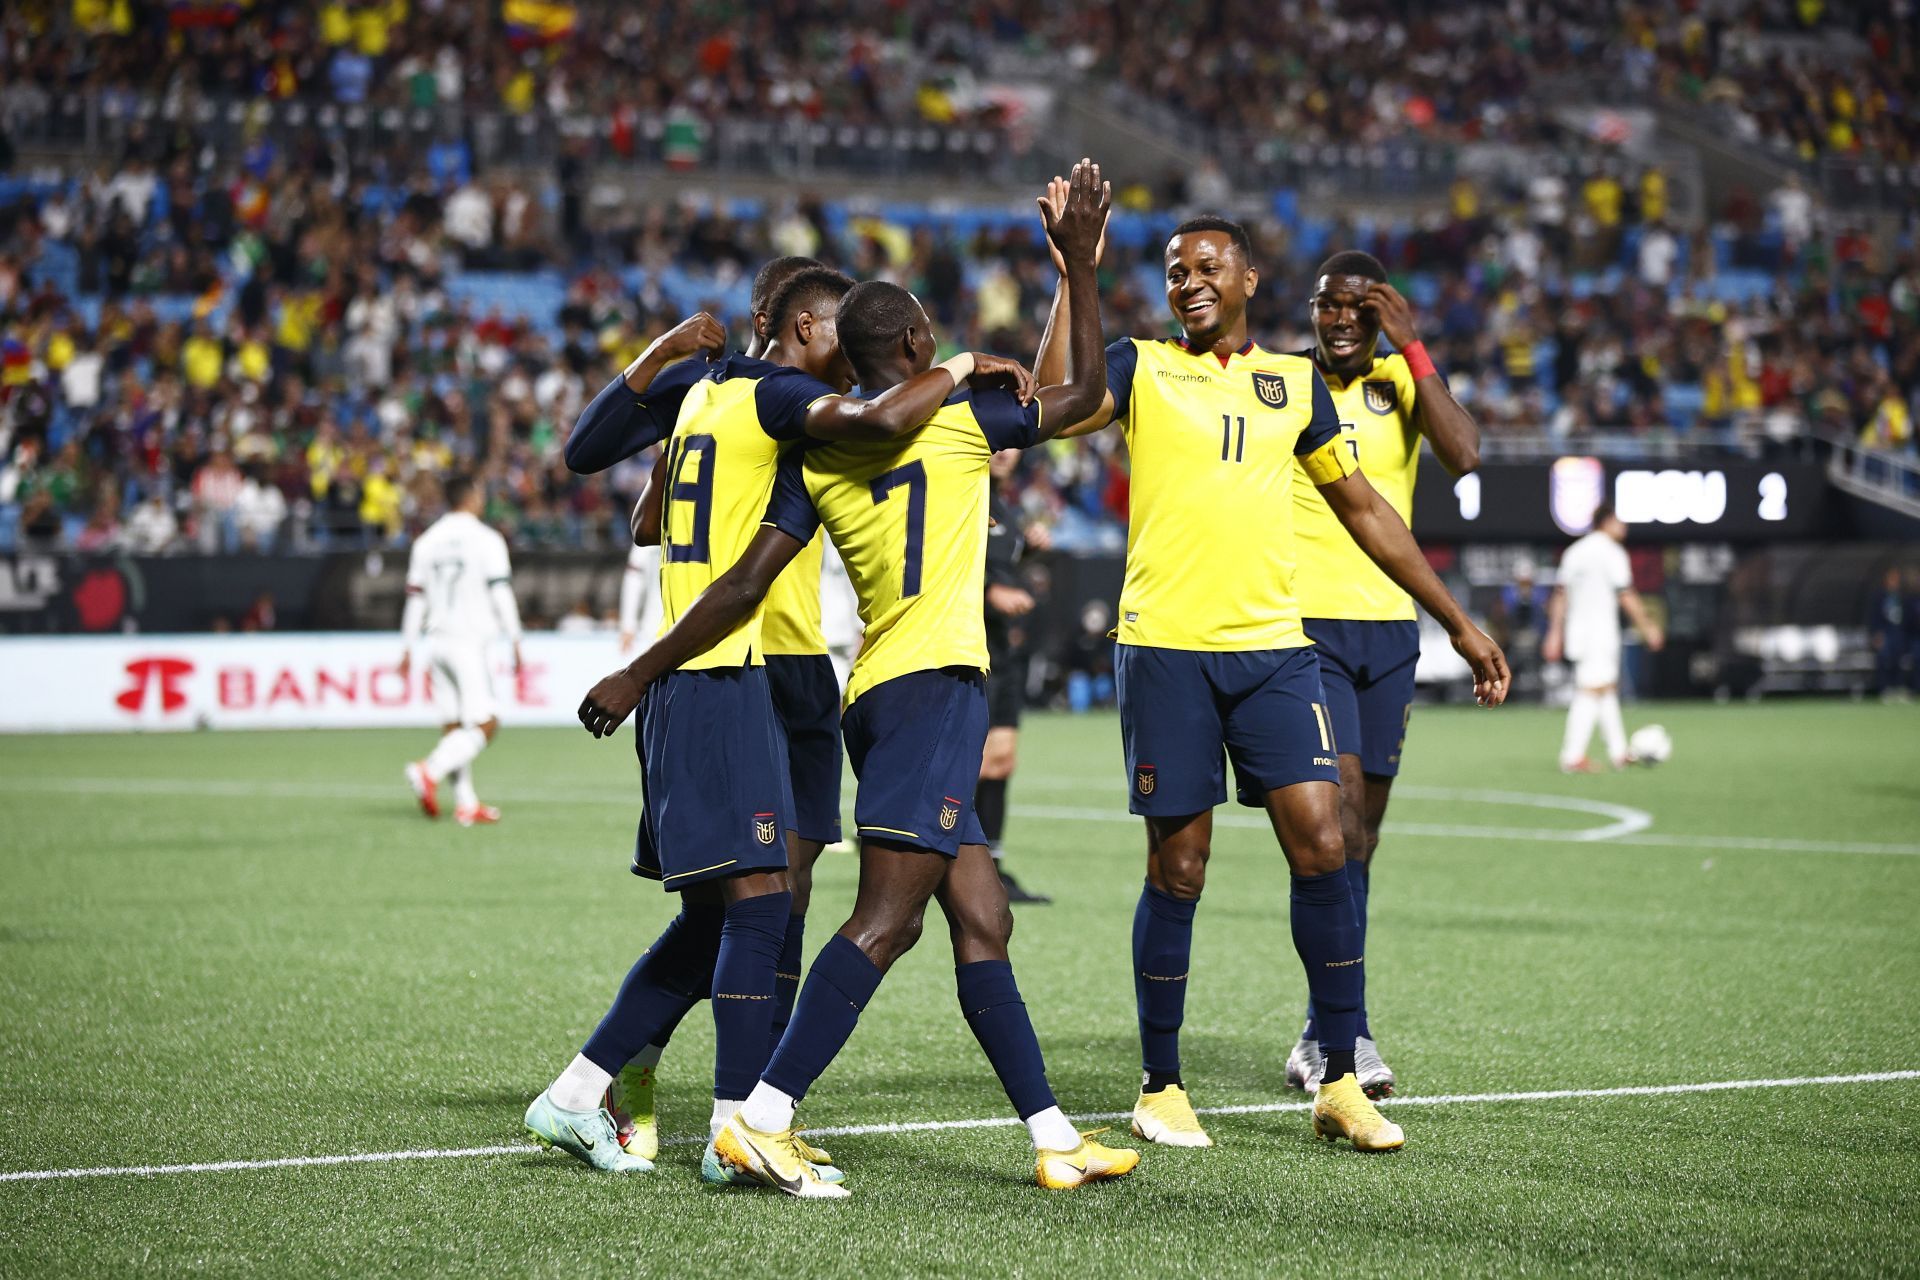 Ecuador host Venezuela in their upcoming FIFA World Cup qualifying fixture on Thursday